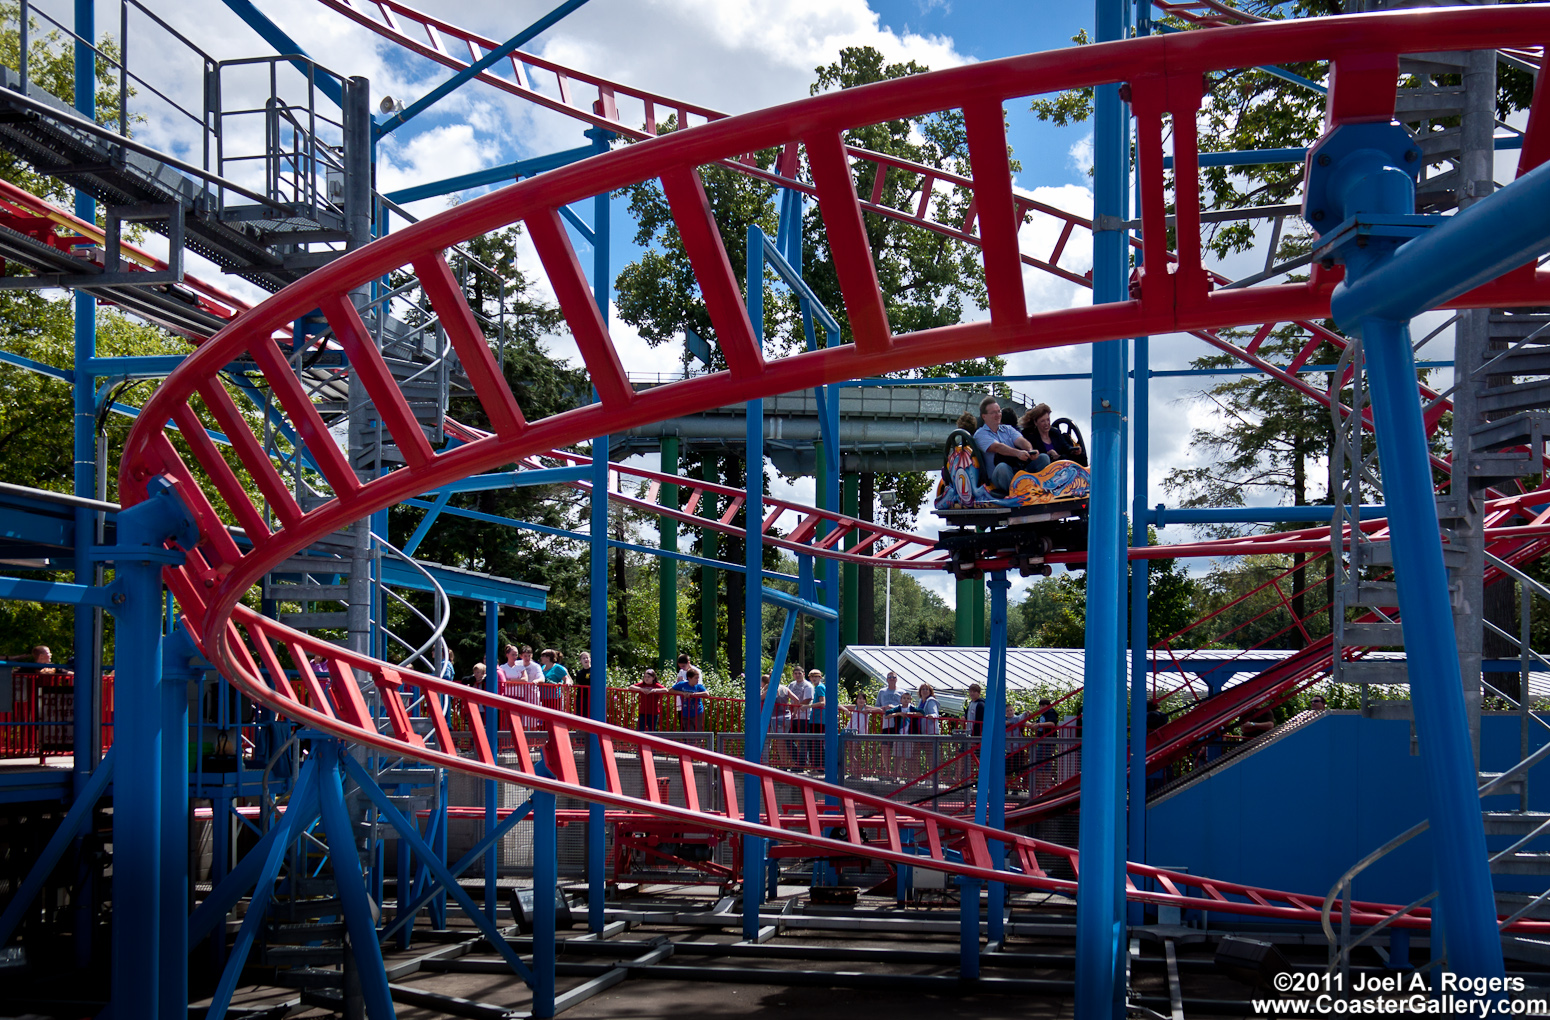 Spinning coaster built by the Maurer Sohne company